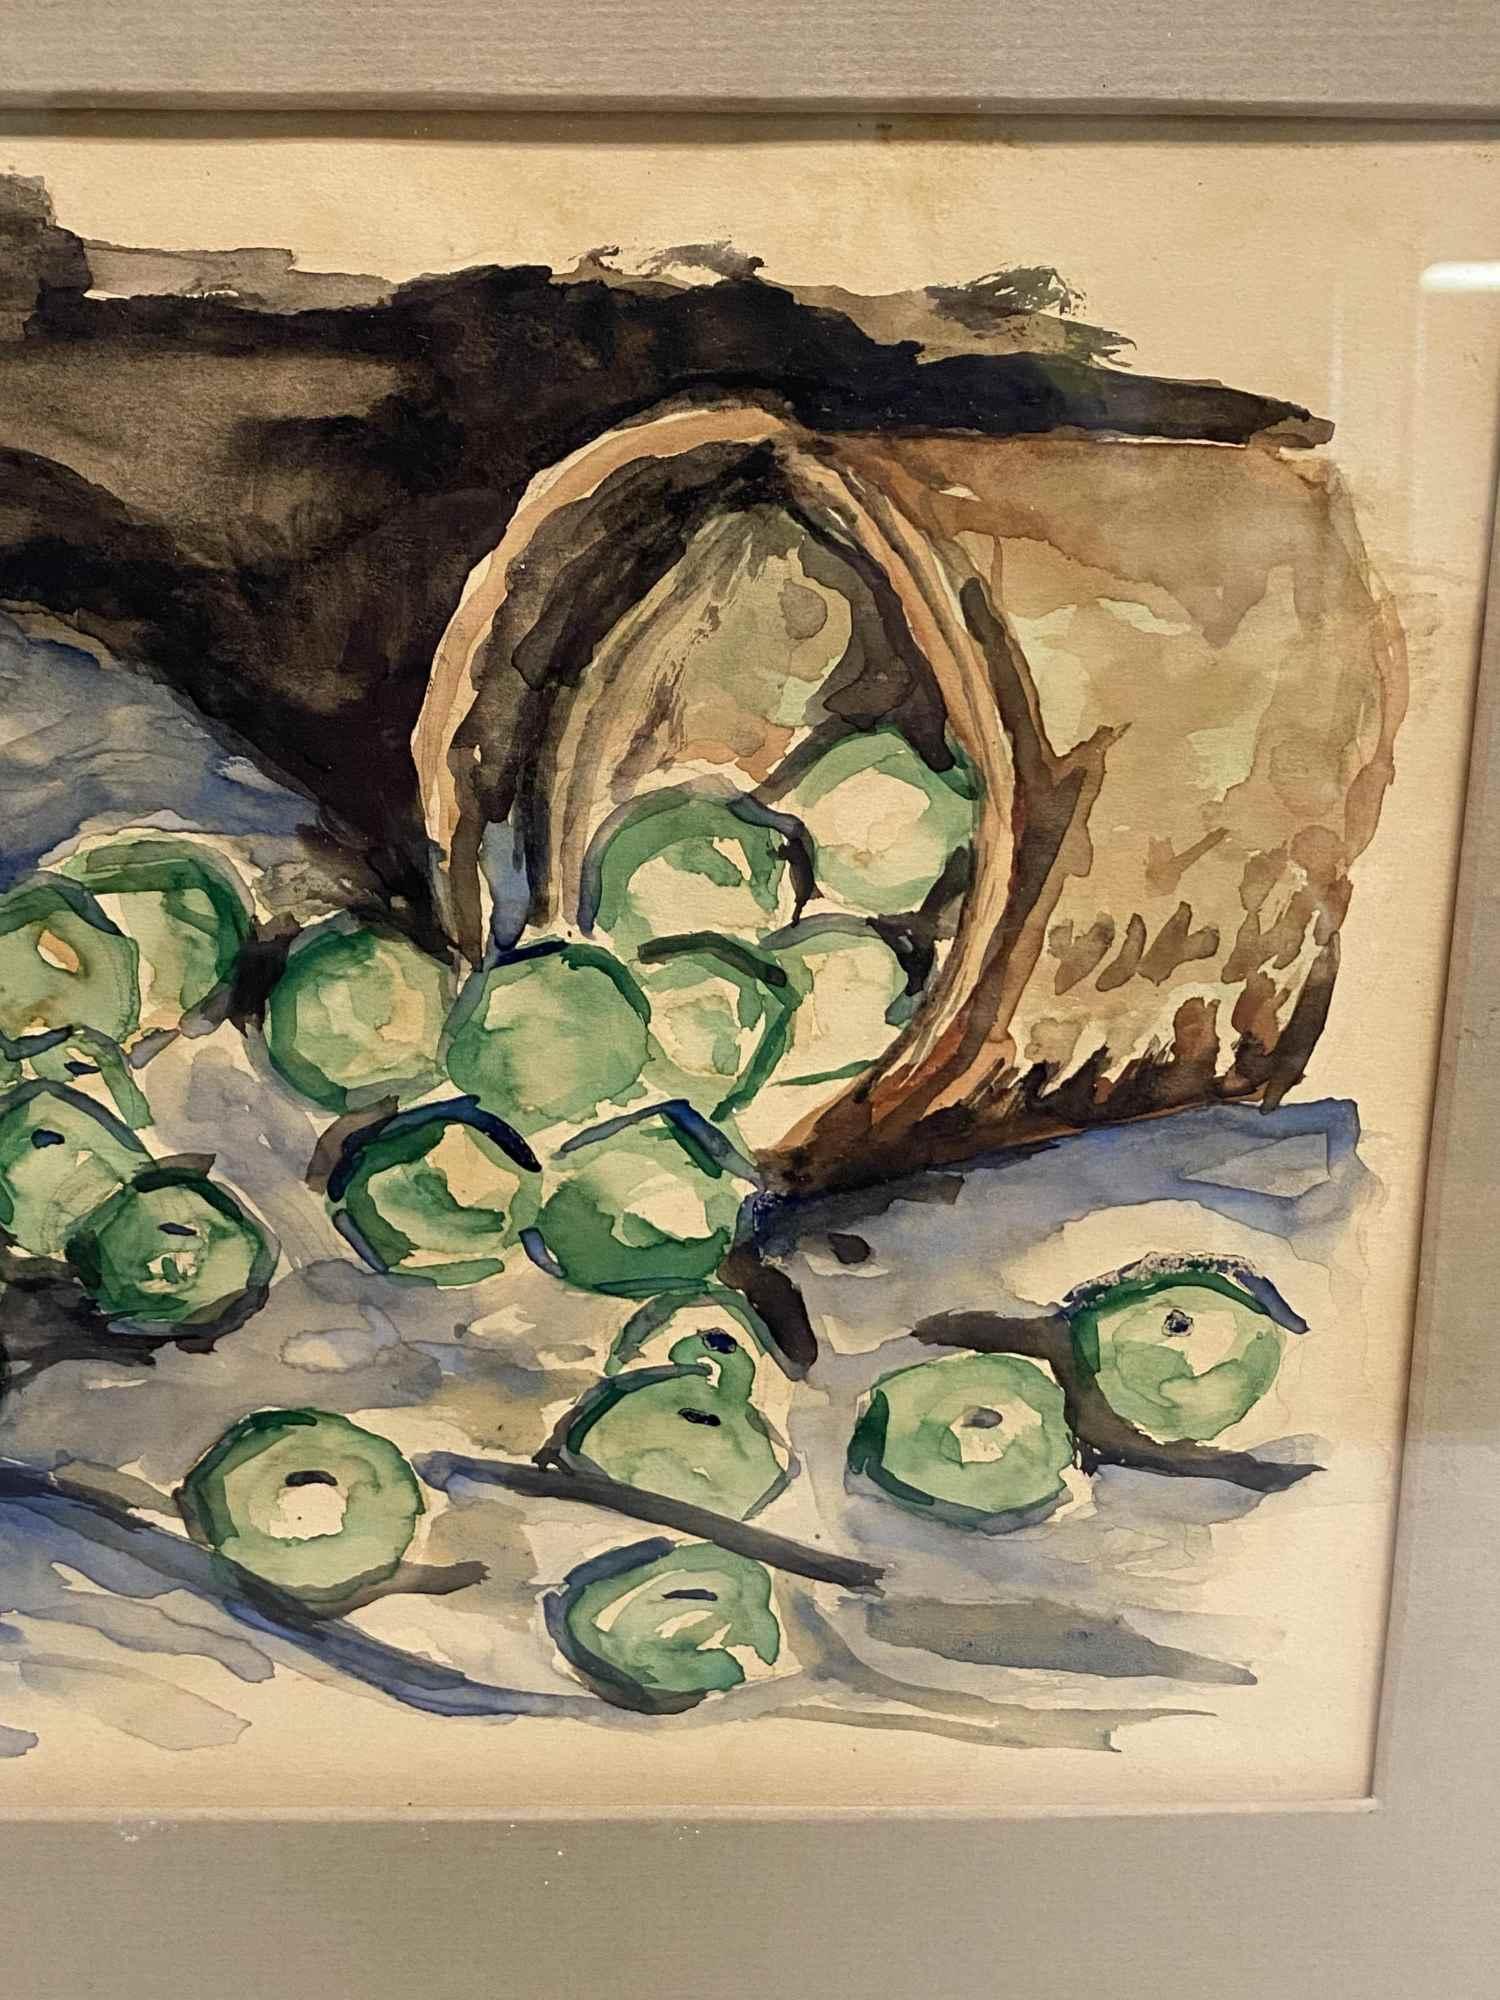 WATERCOLOR ON PAPER WITH APPLES